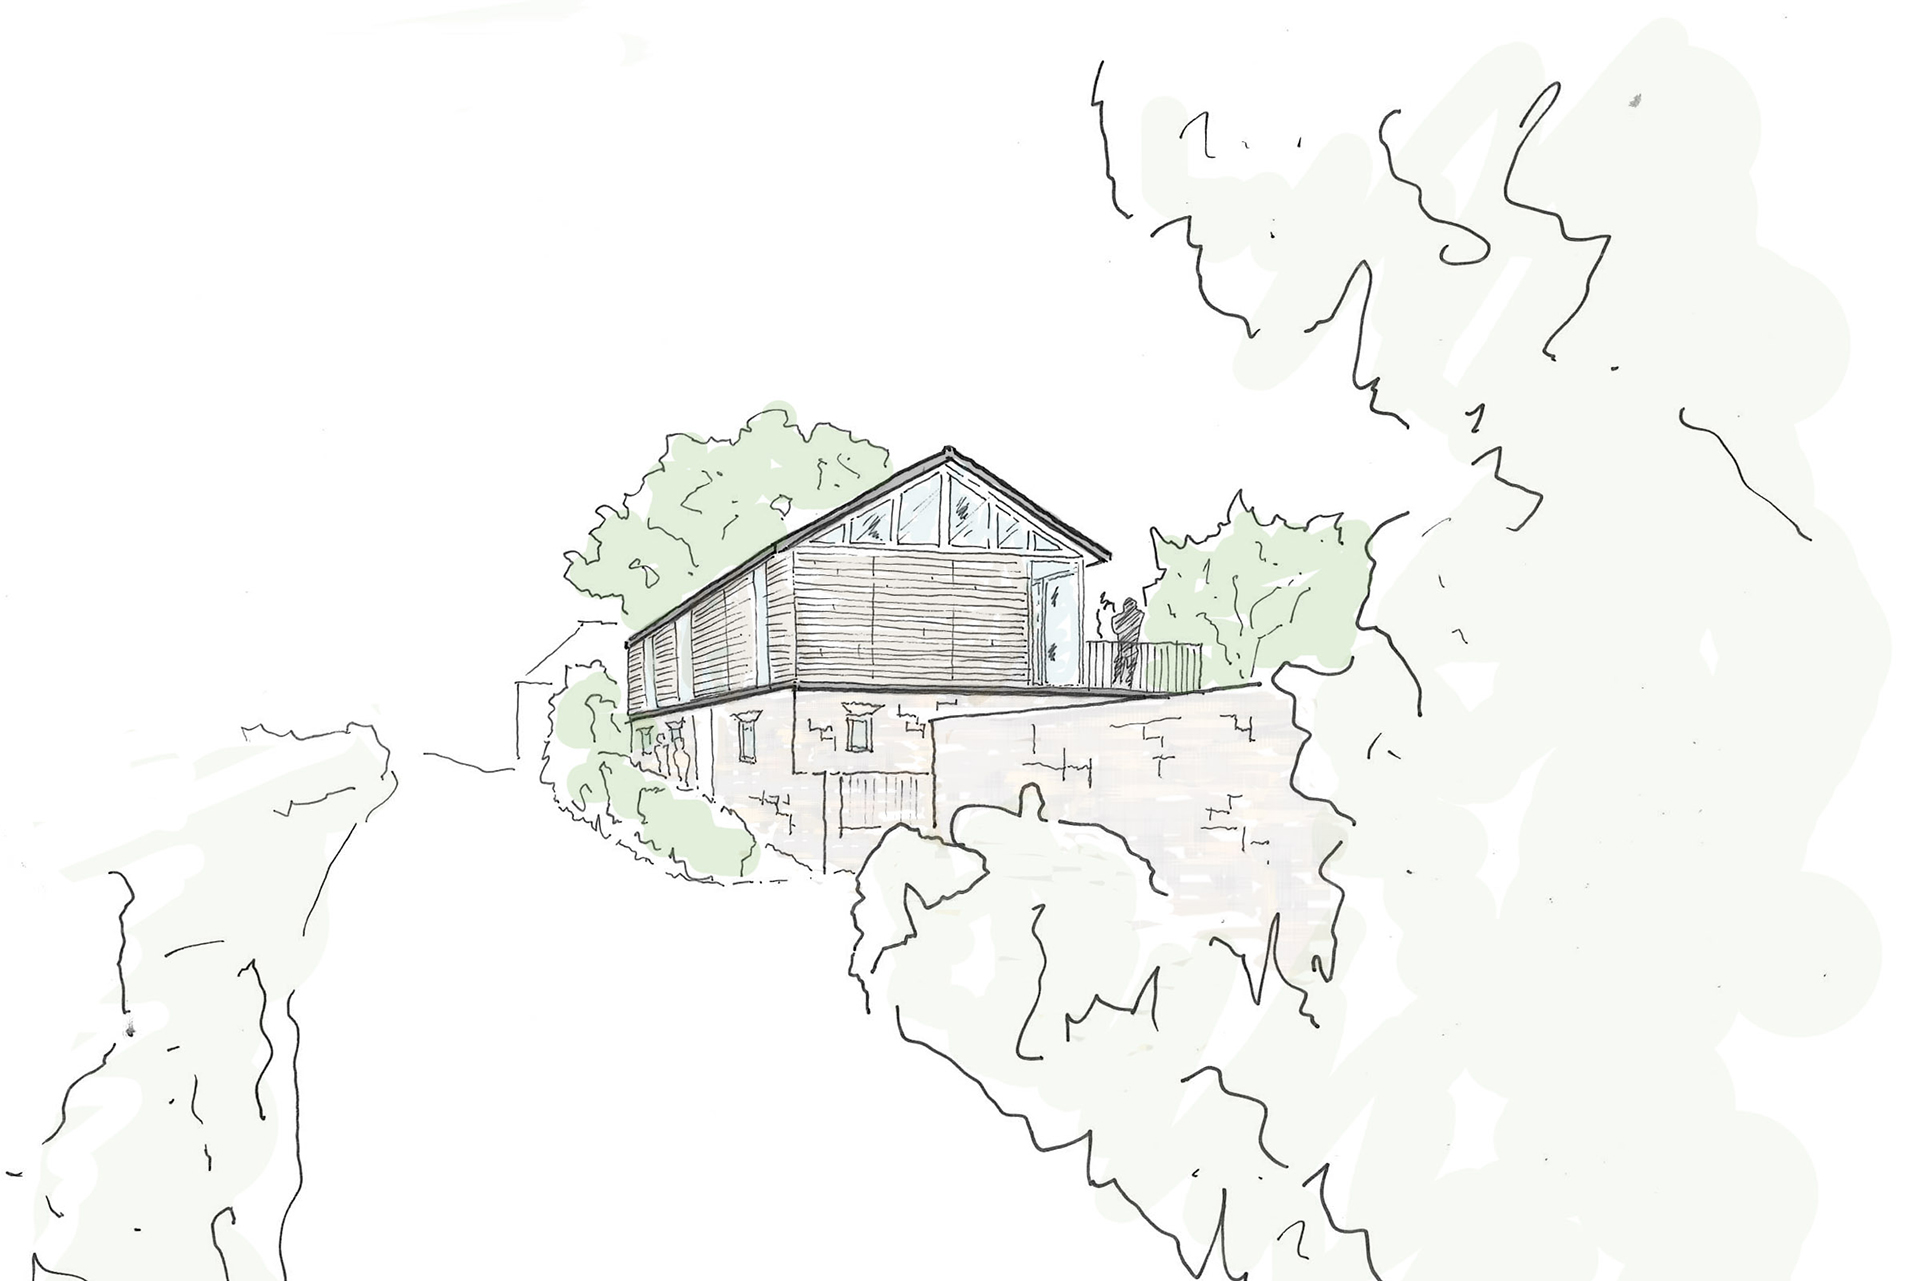 sketch scheme of approach view to modern house with timber clad